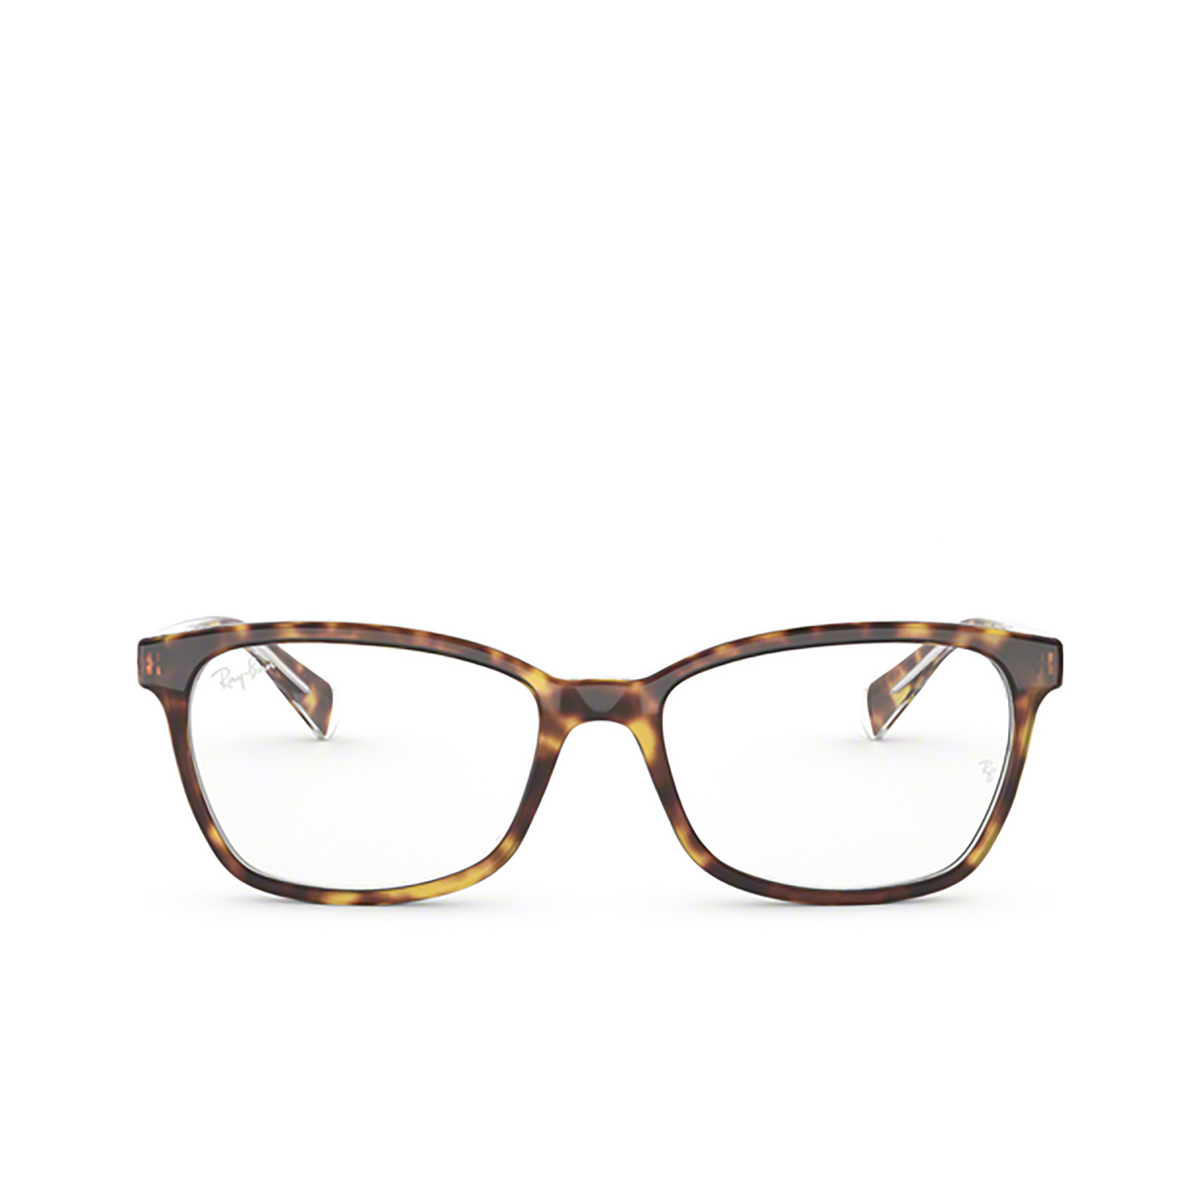 Ray-Ban RX5362 Eyeglasses 5082 TOP HAVANA ON TRANSPARENT - front view